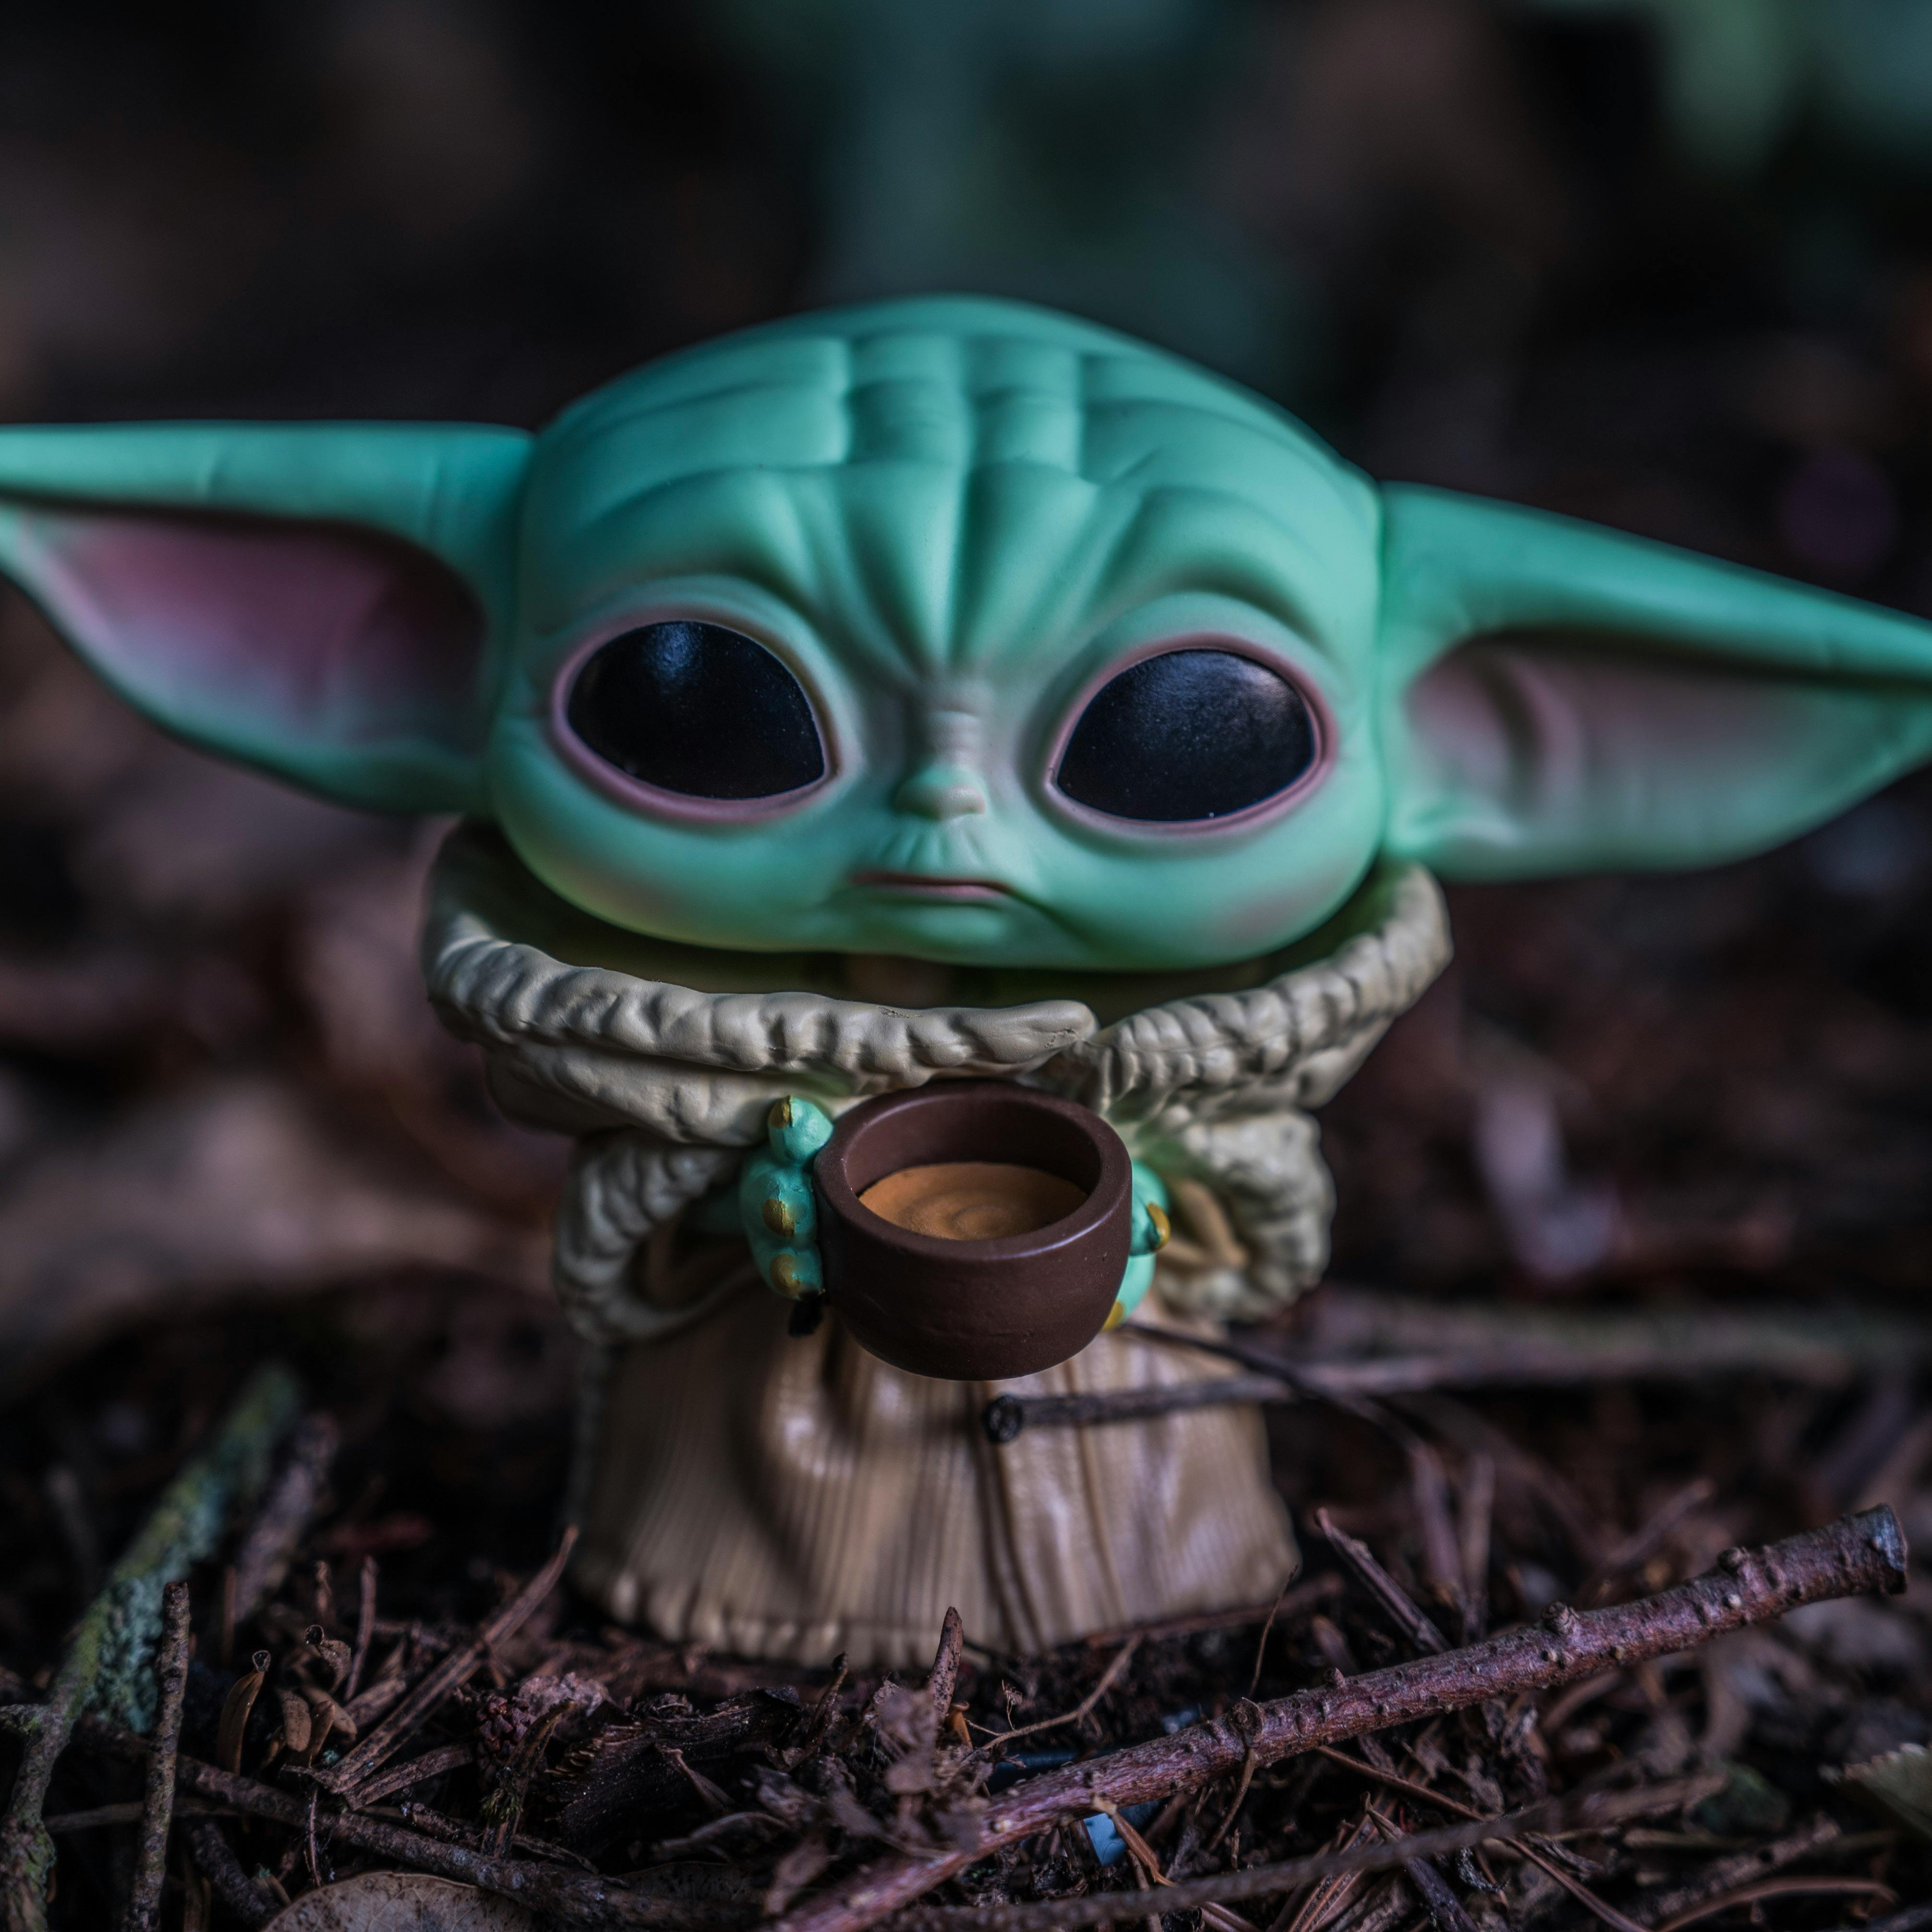 Close-Up View of a Yoda Figurine · Free Stock Photo